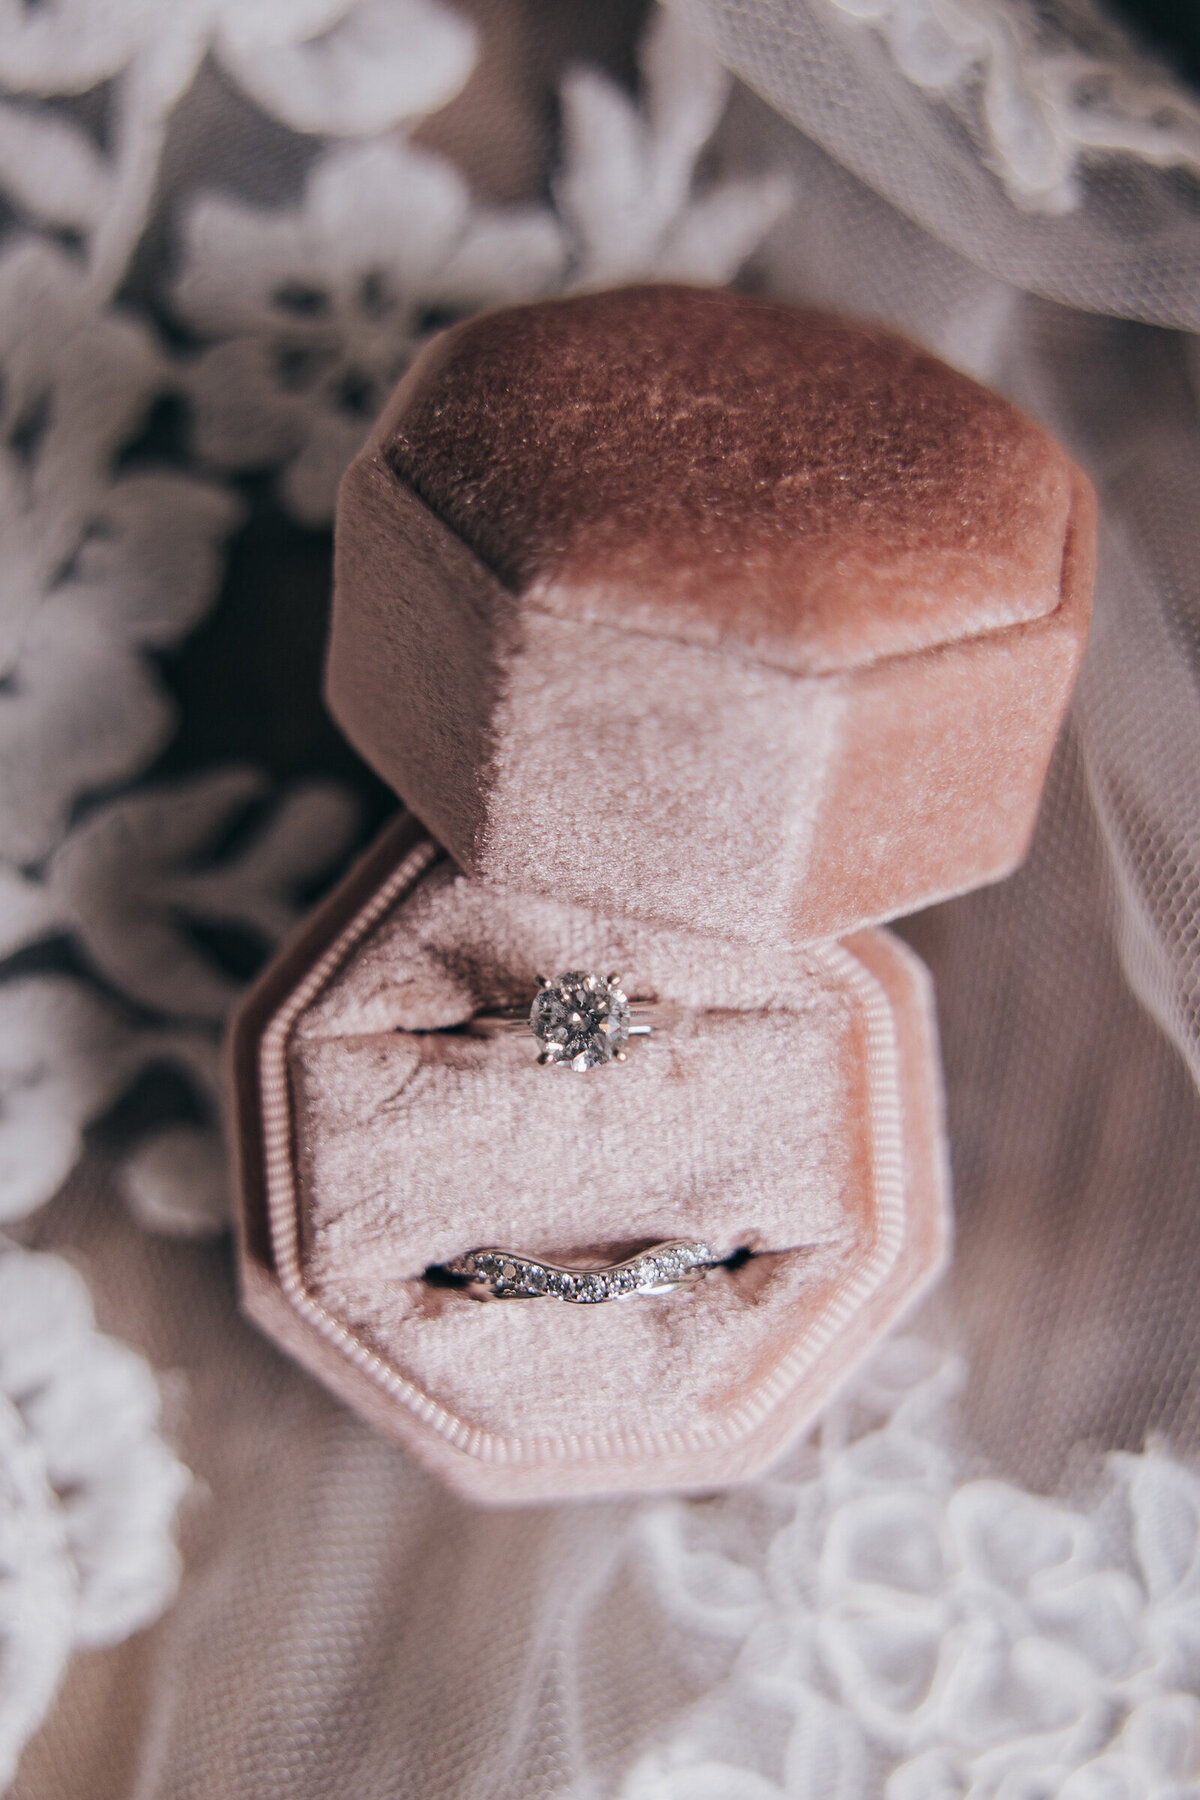 Detail shot of stunning diamond solitaire and diamond wedding band in pink velvet ring box photographed by Nova Markina